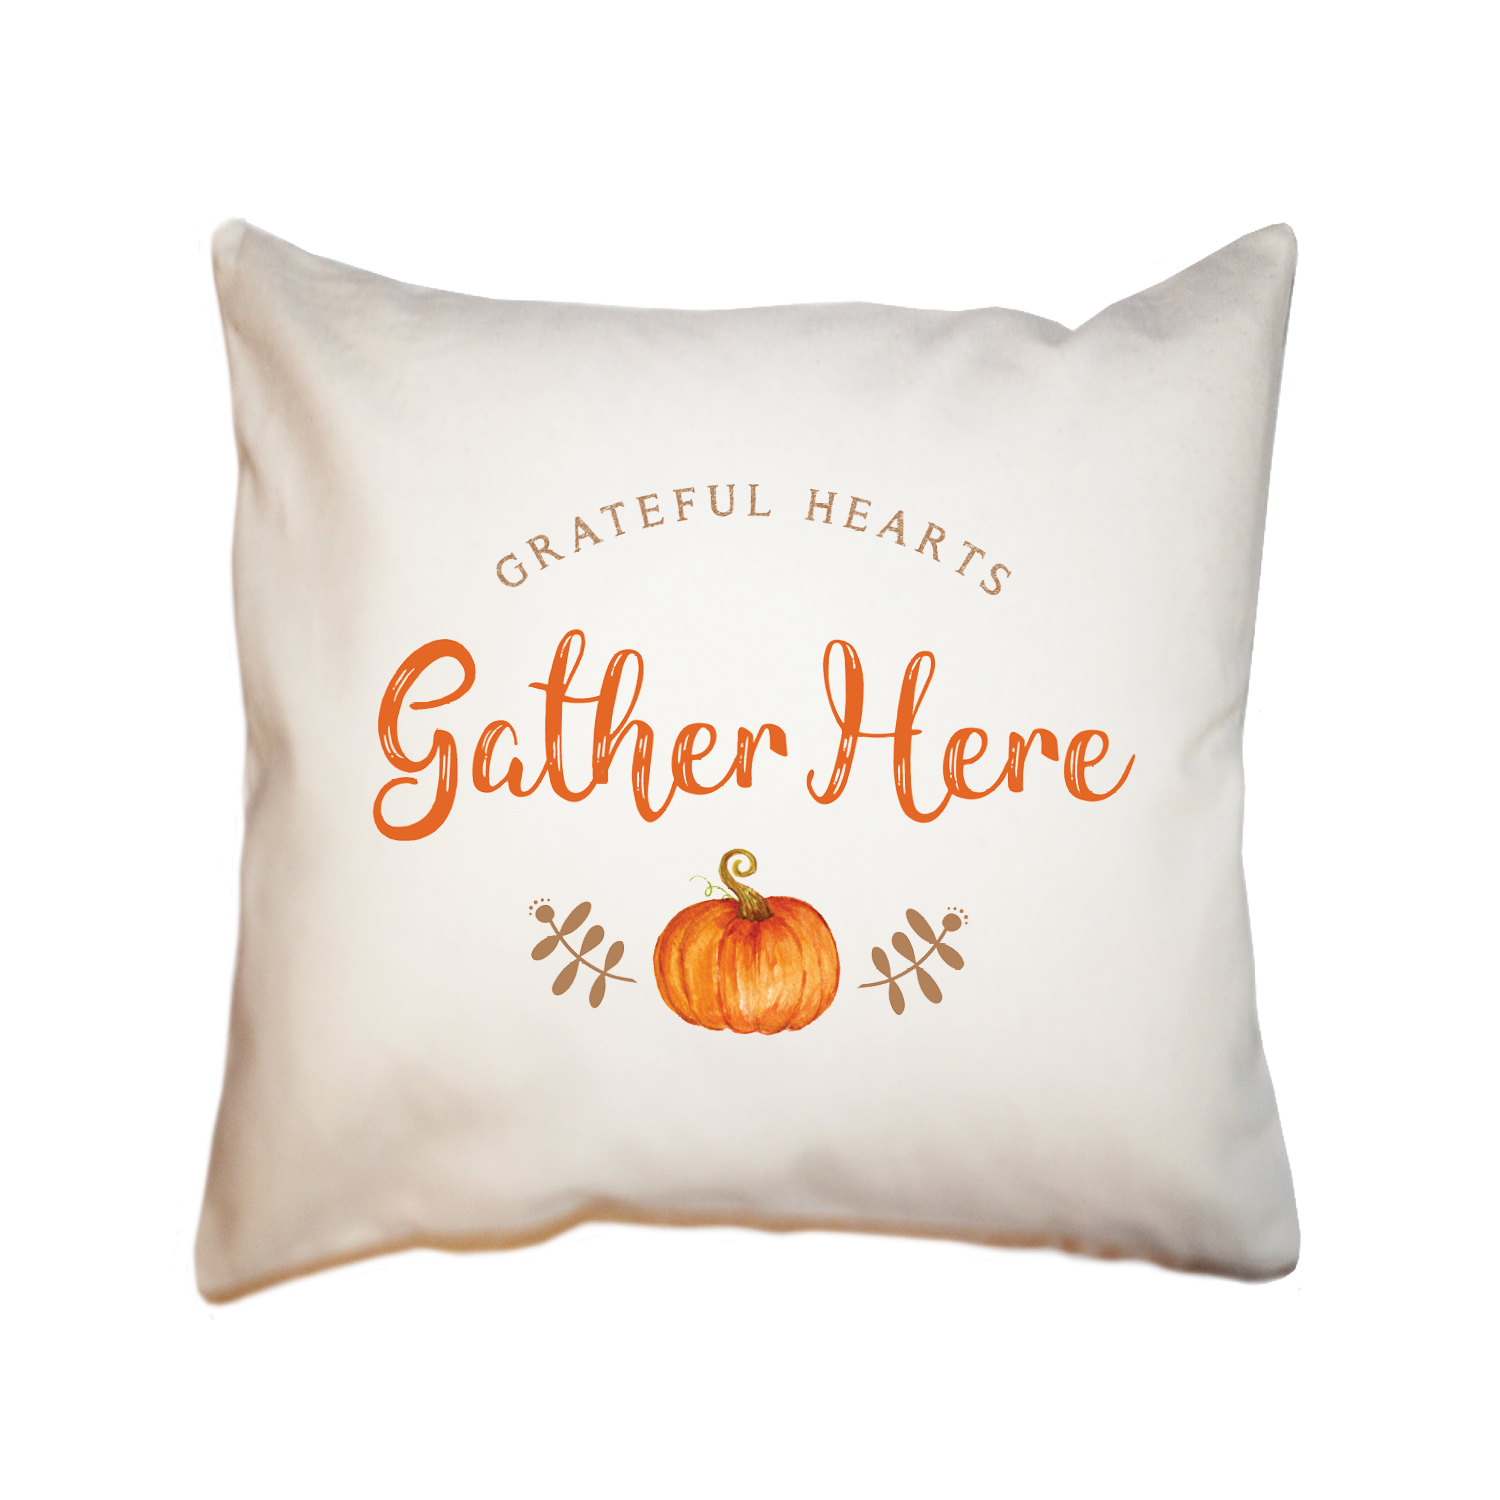 grateful hearts gather here square pillow